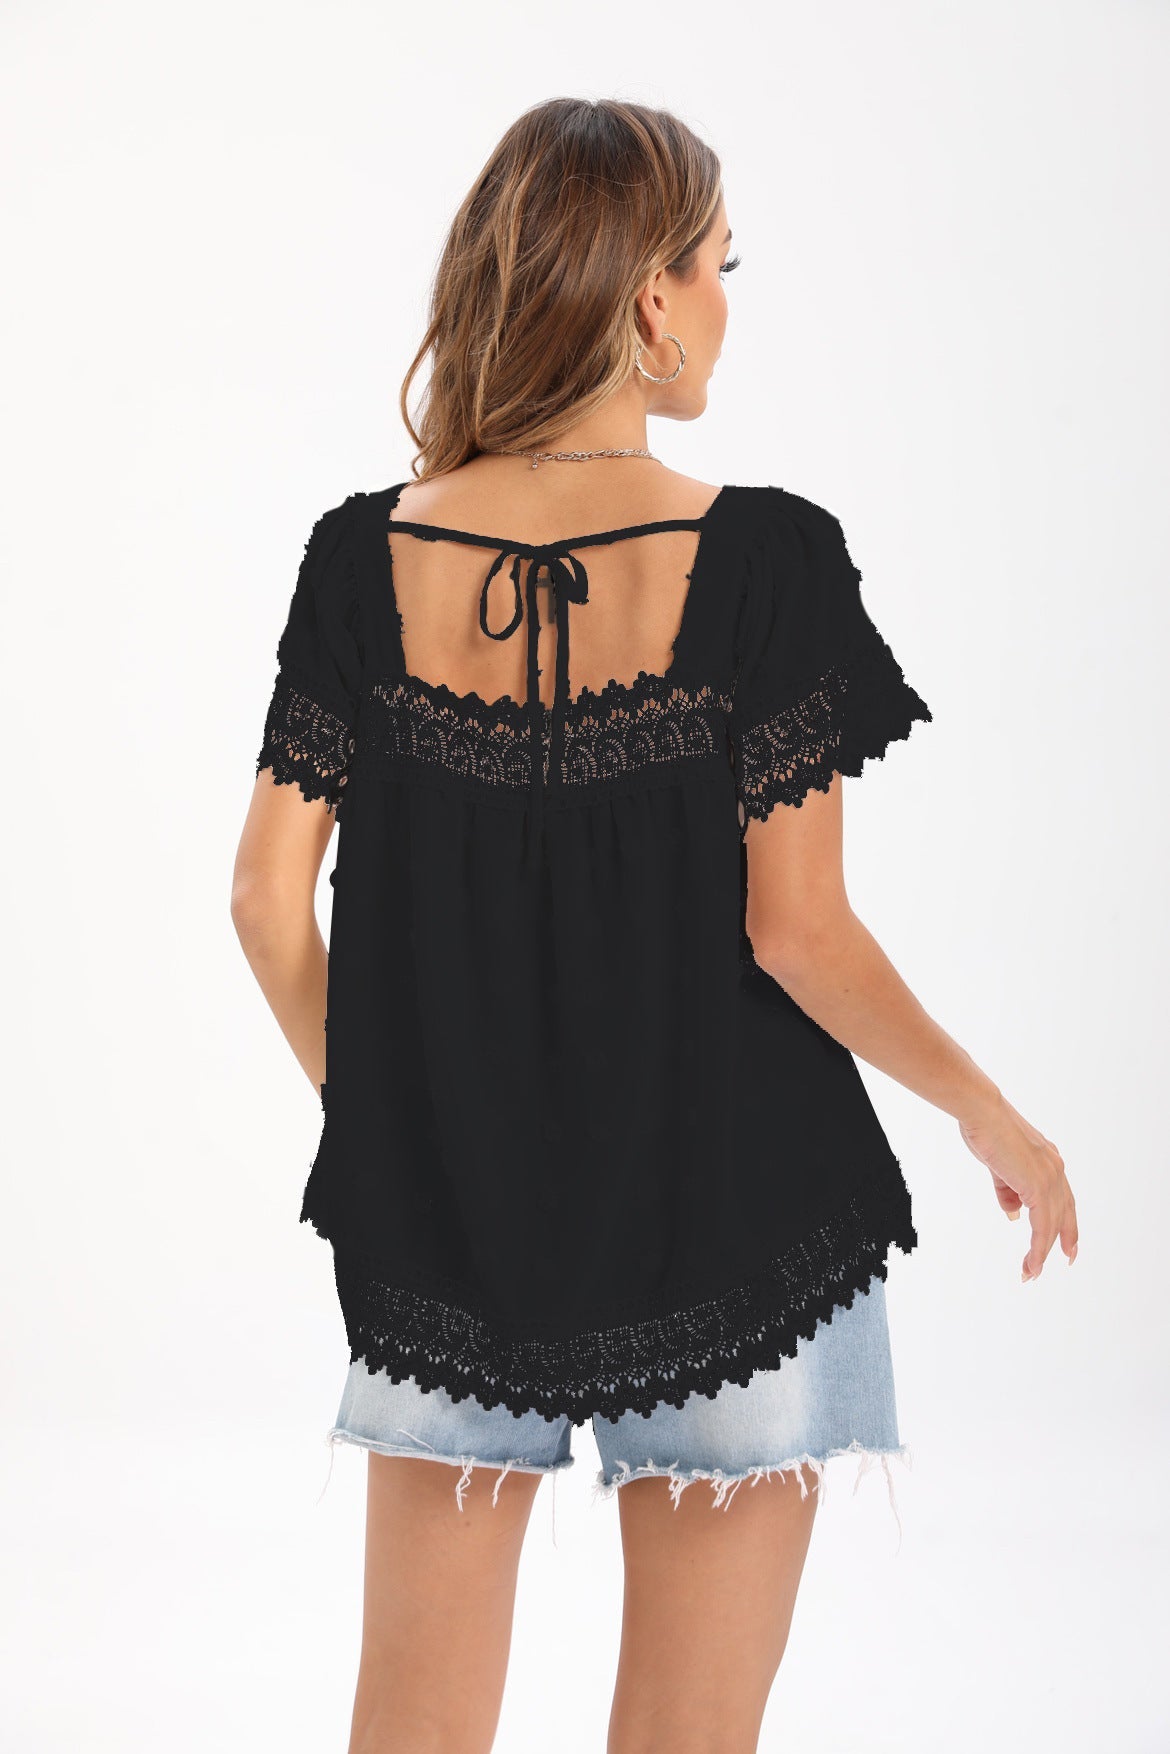 Women Short Sleeve Scoop Neck Lace Hollow Stitching Tops